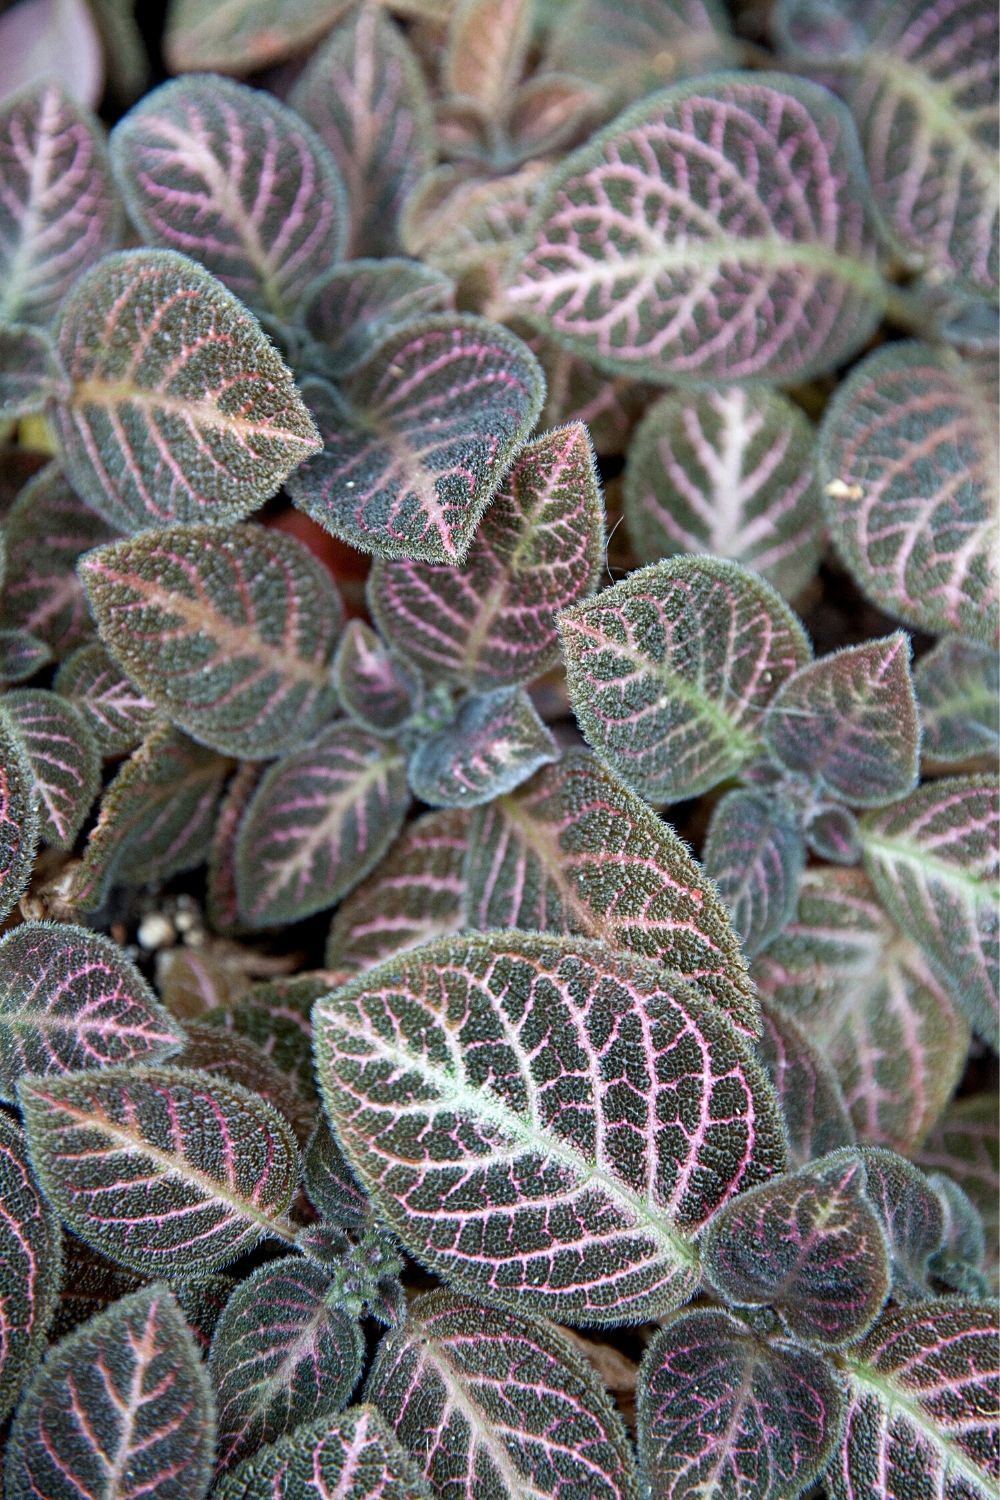 Flame violet is another attractive plant you can grow in a terrarium